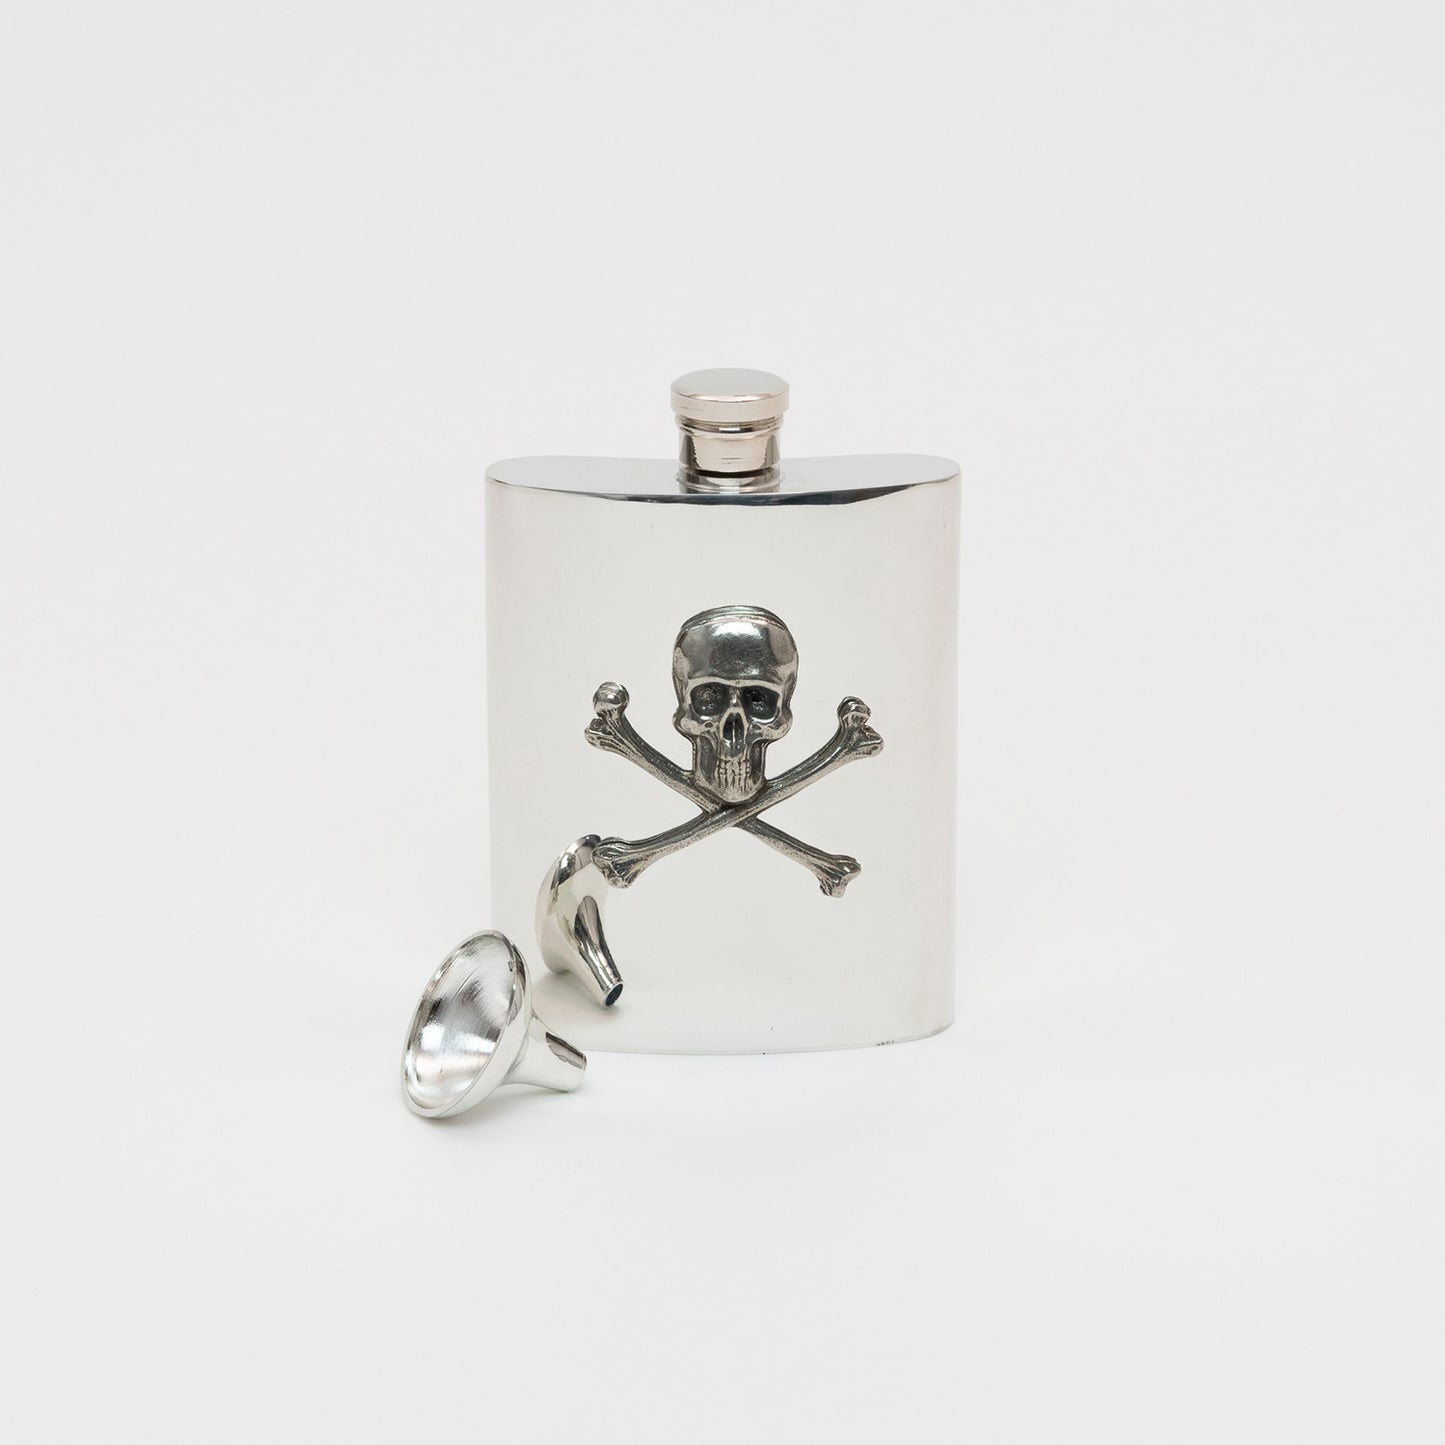 A silver hip flash with a silver skull and cross bones detail. The hip flash is displayed with the small funnel that comes with it.